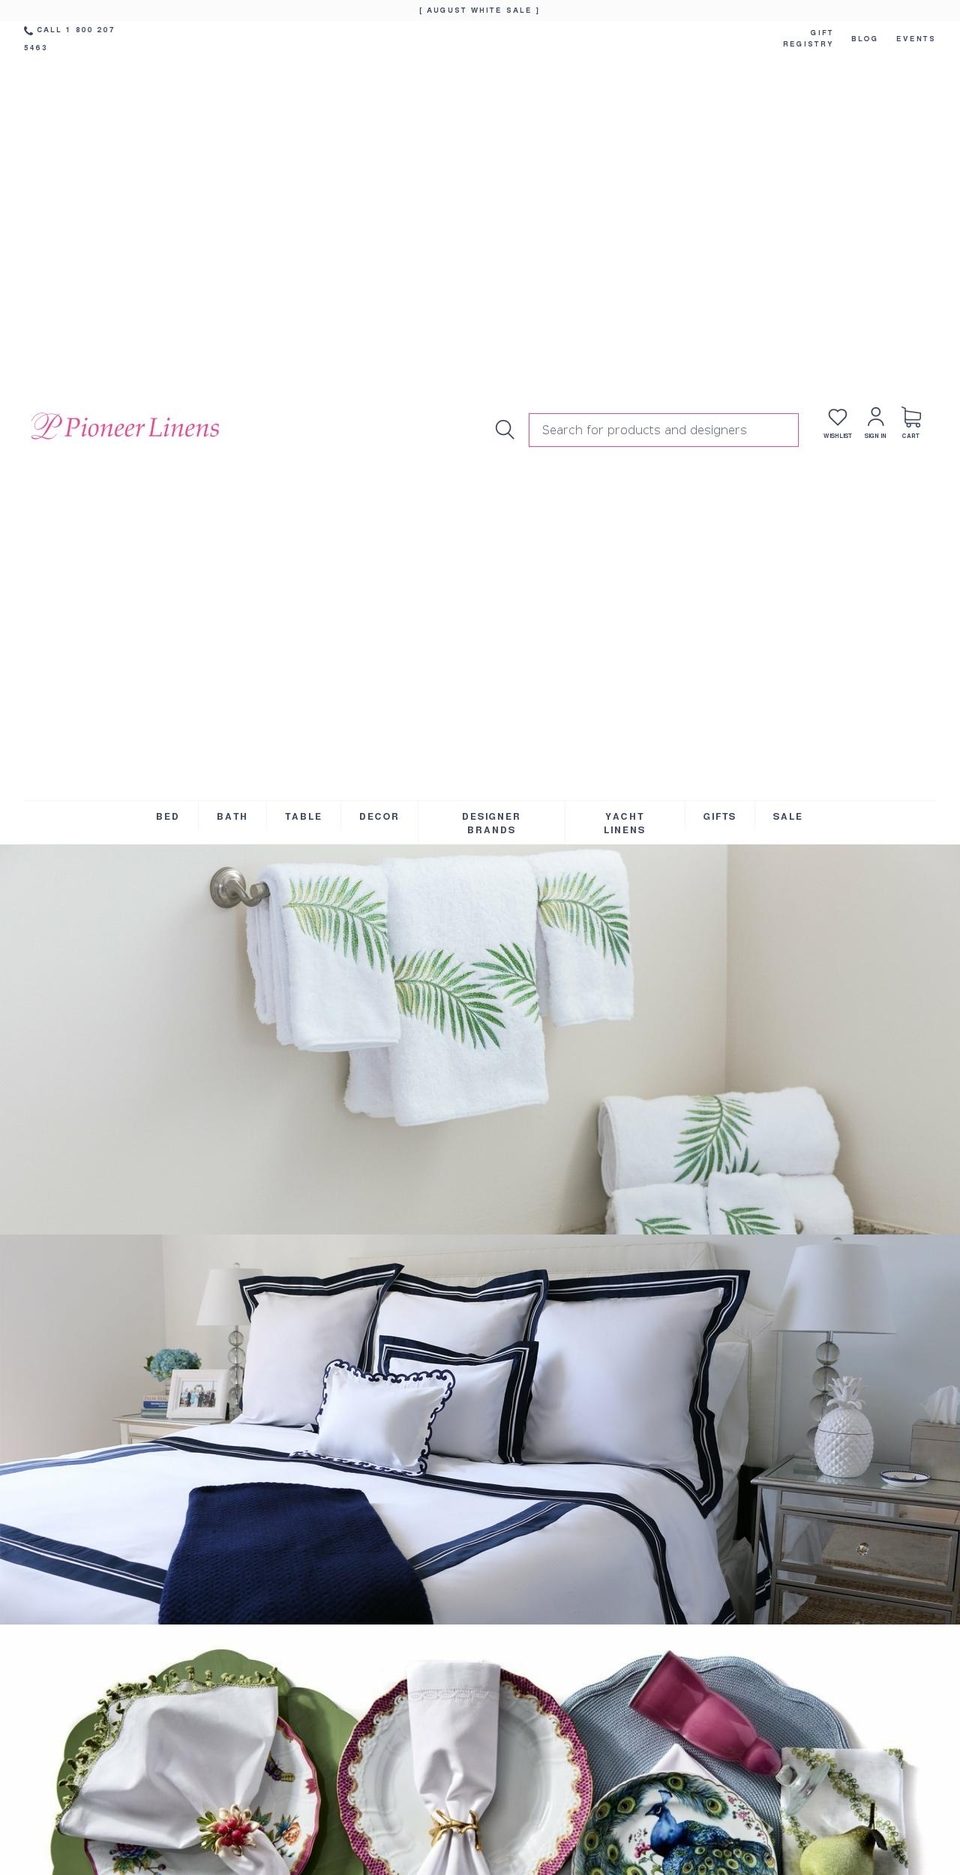 Buko Shopify Theme - Products Consolidation Shopify theme site example mpioneerlinens.com